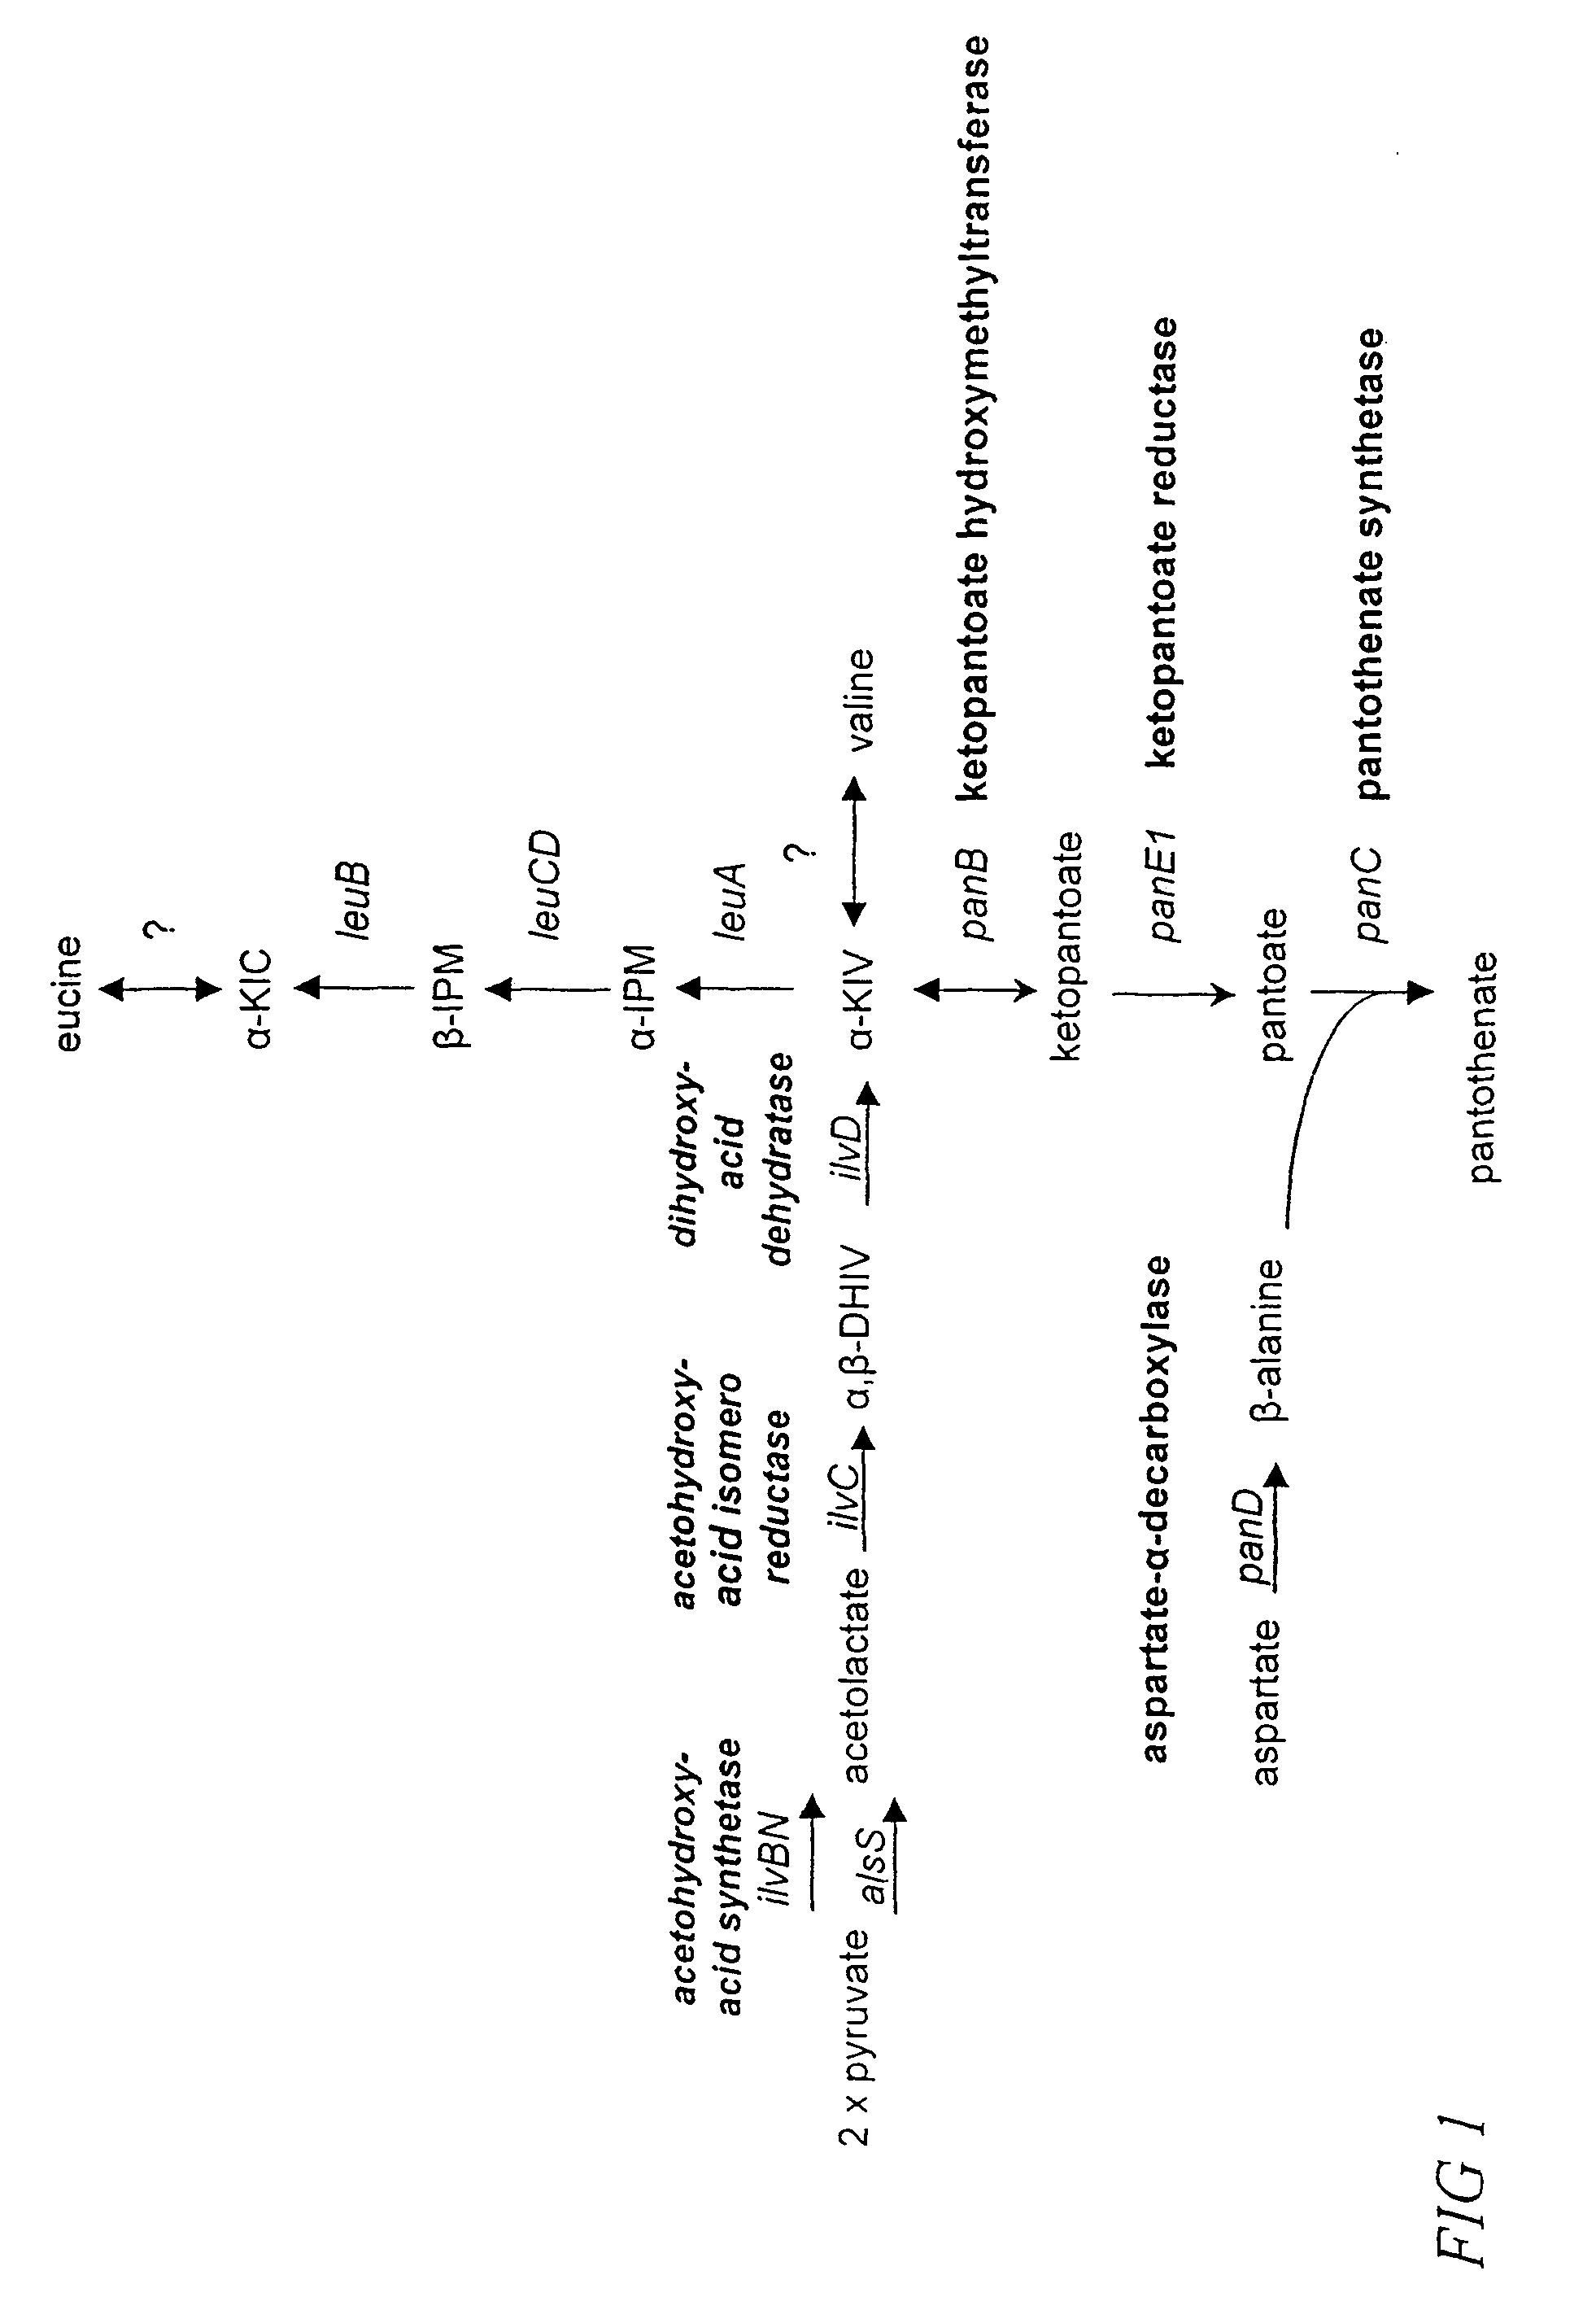 Processes for enhanced production of pantothenate